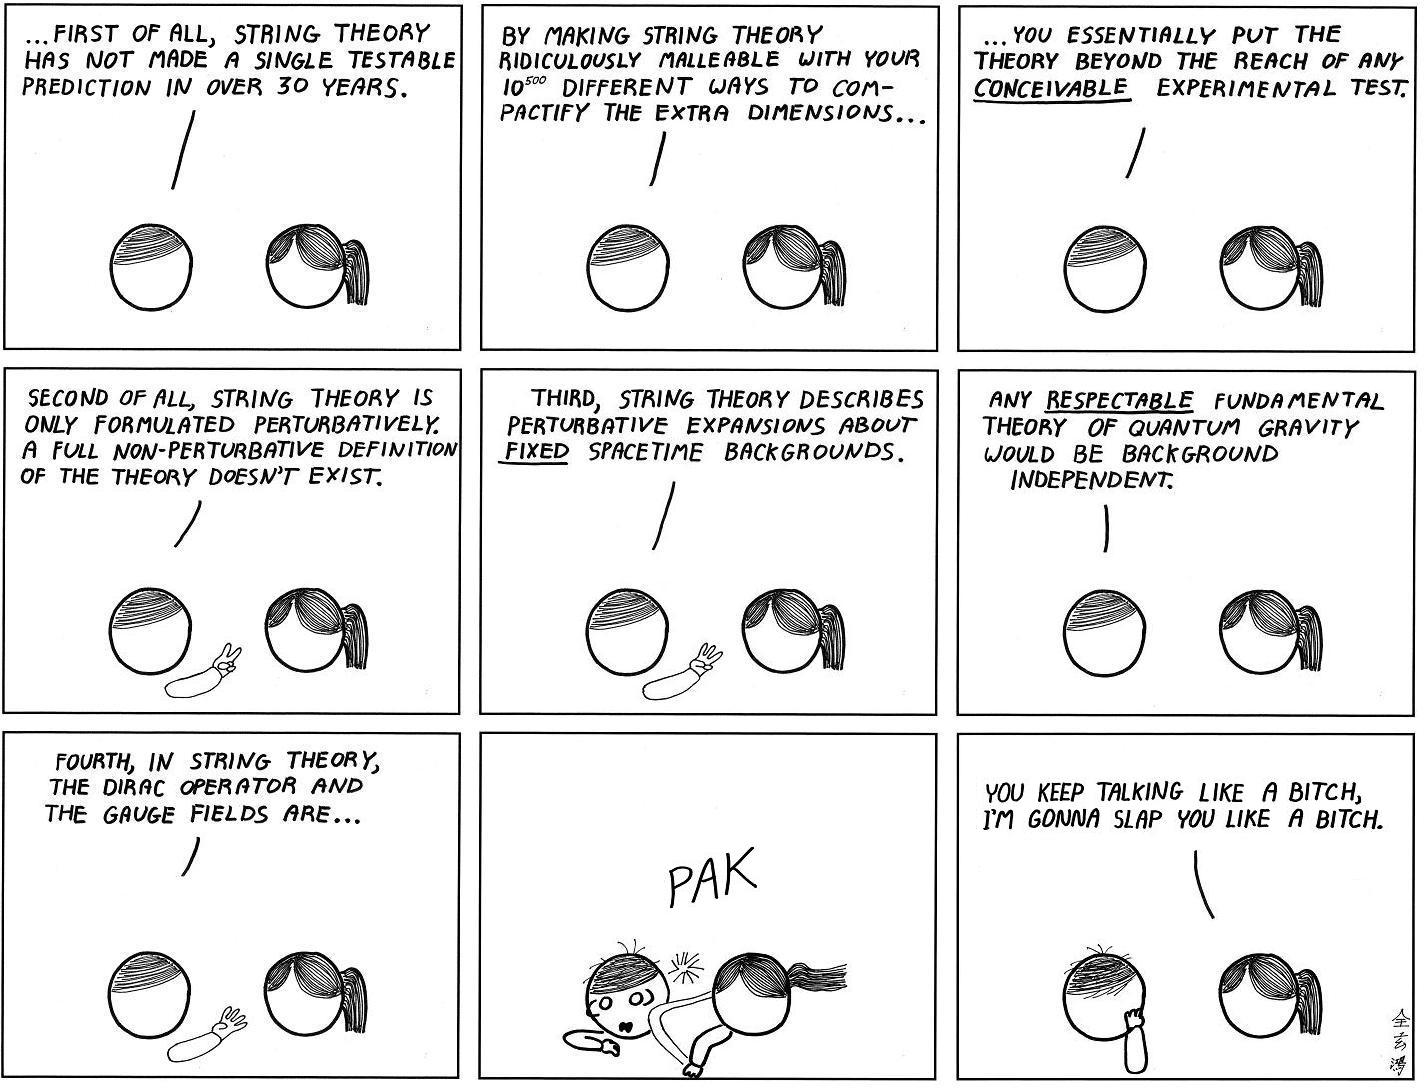 arguing with a string theorist by abstruse goose